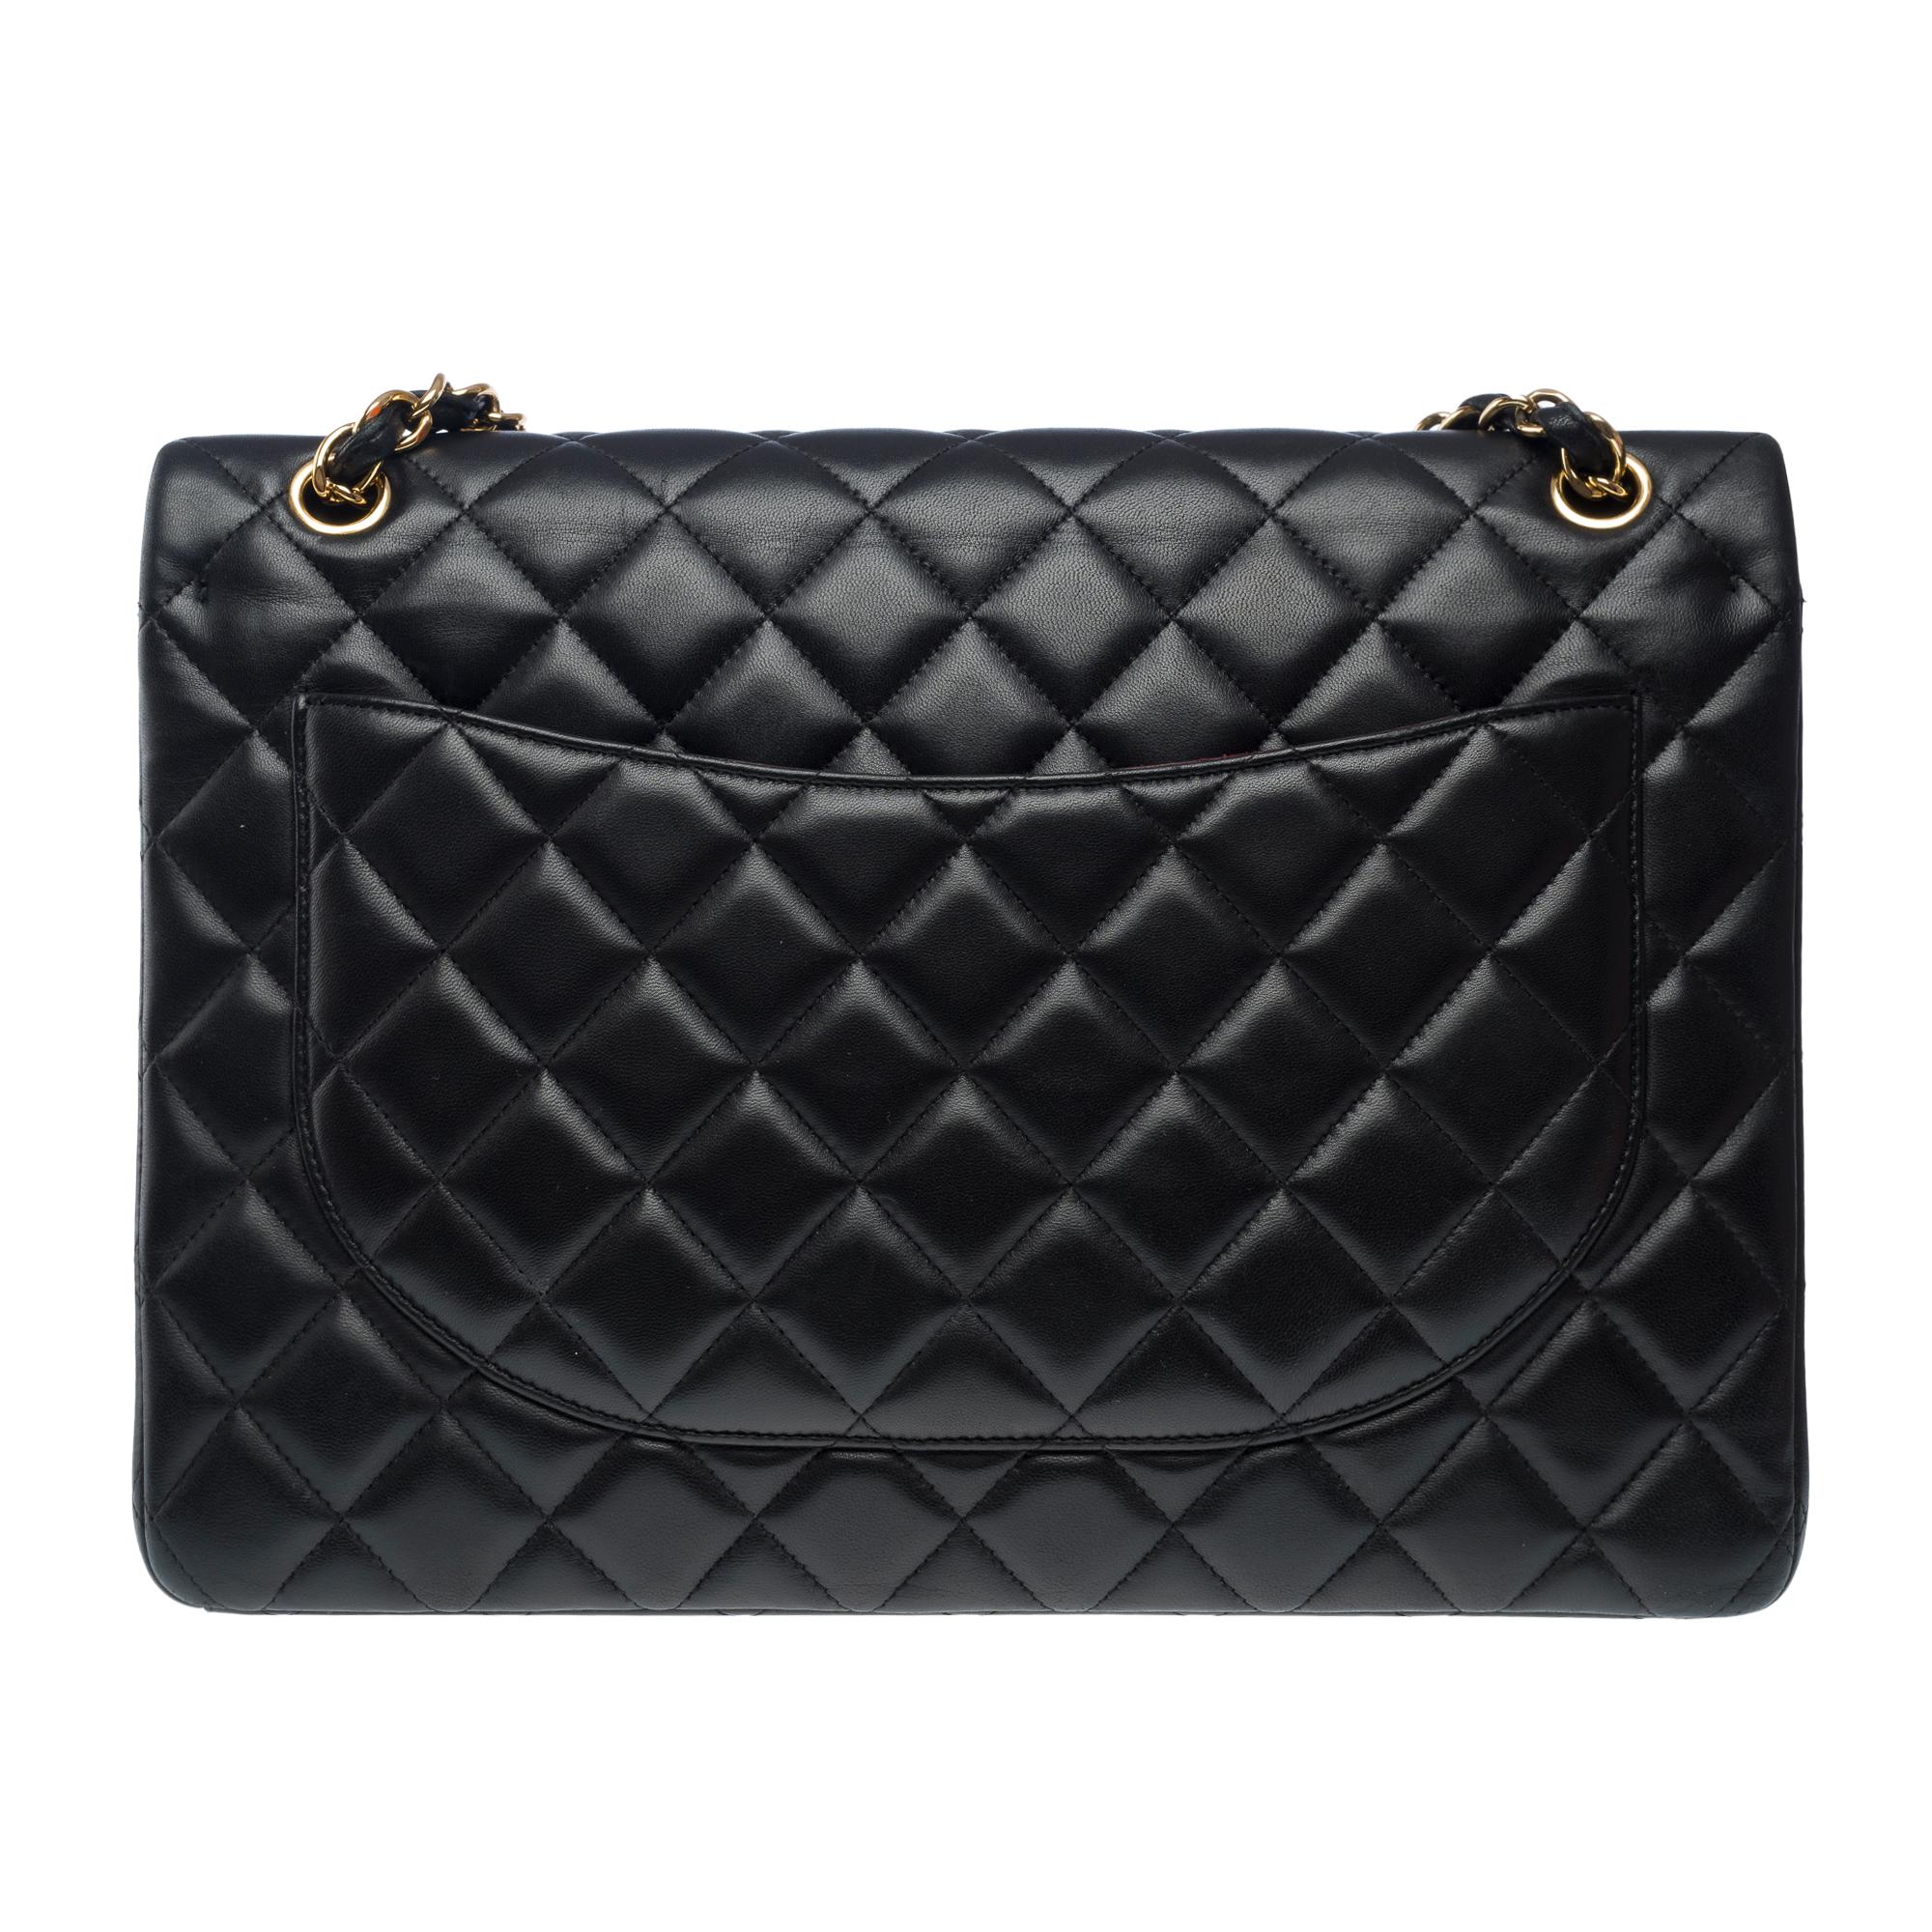 Women's Chanel Timeless Maxi Jumbo double flap shoulder bag in Black quilted lamb, GHW For Sale